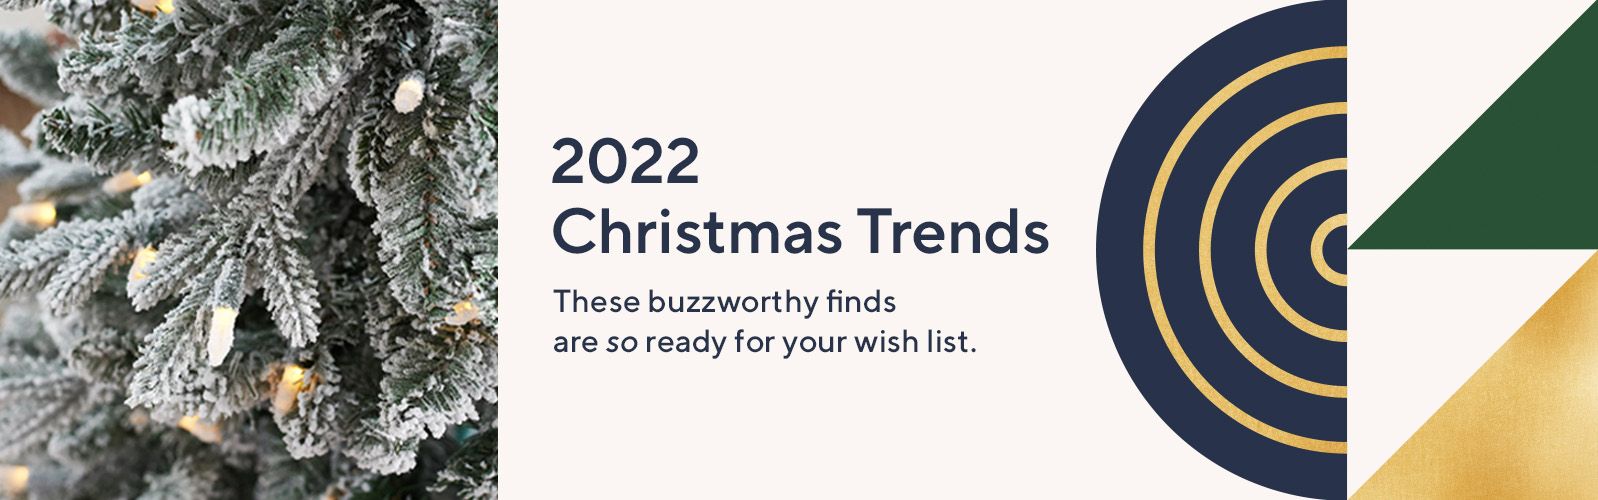 2022 Holiday Trends These buzzworthy finds are so ready for your wish list. 